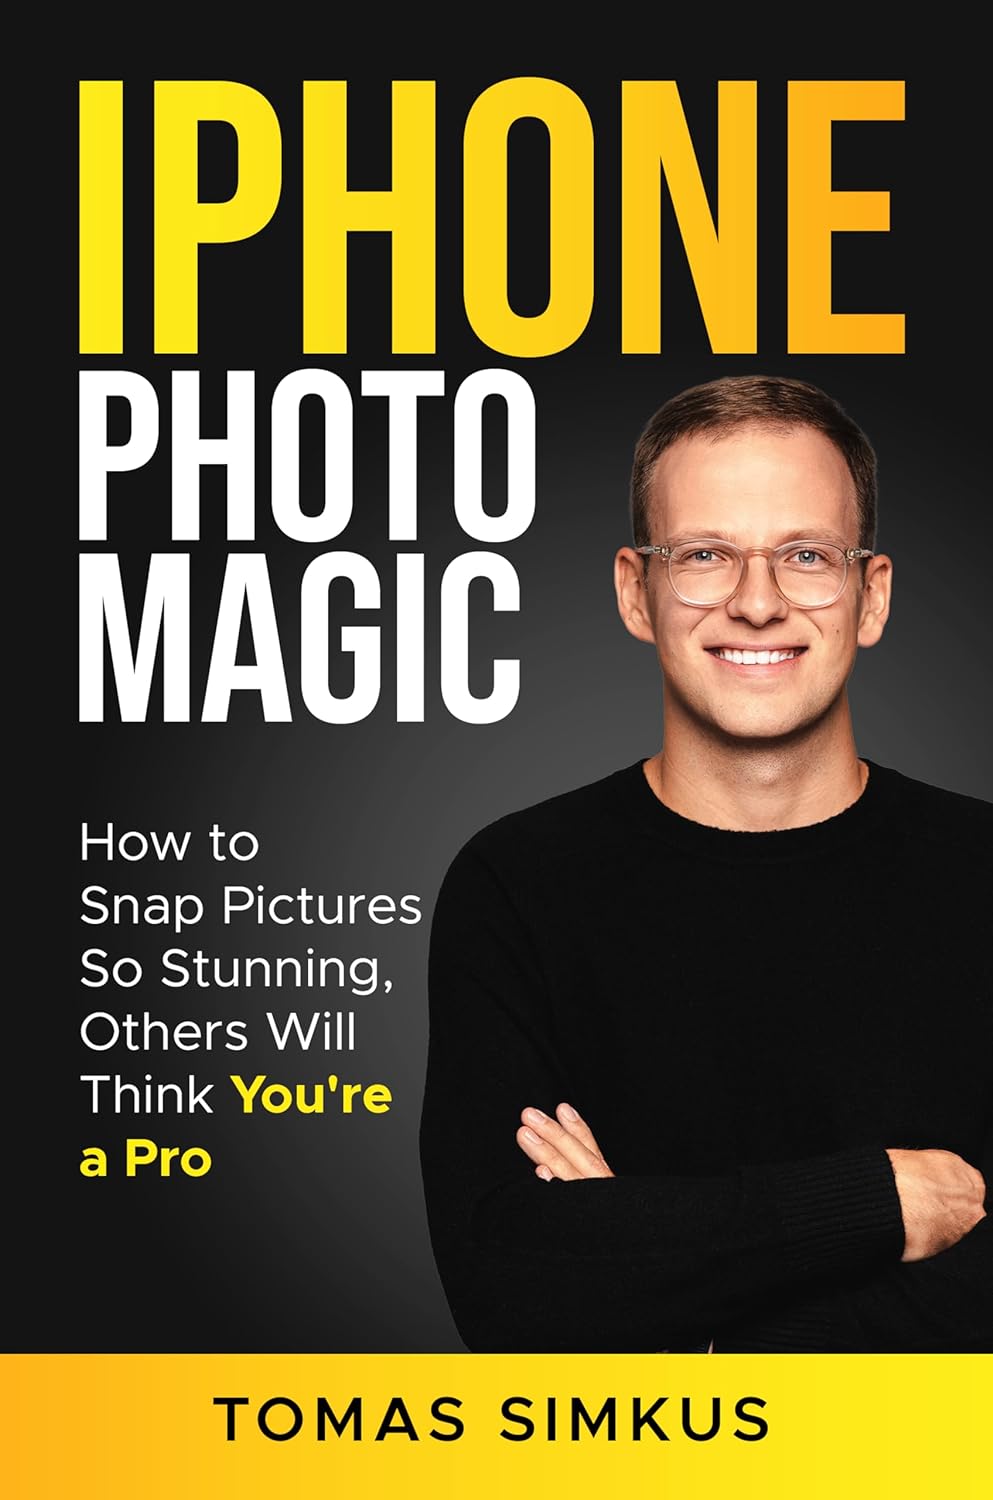 The Best Tips For iPhone Photography - iPhone Photo Magic - How to Snap Pictures So Stunning